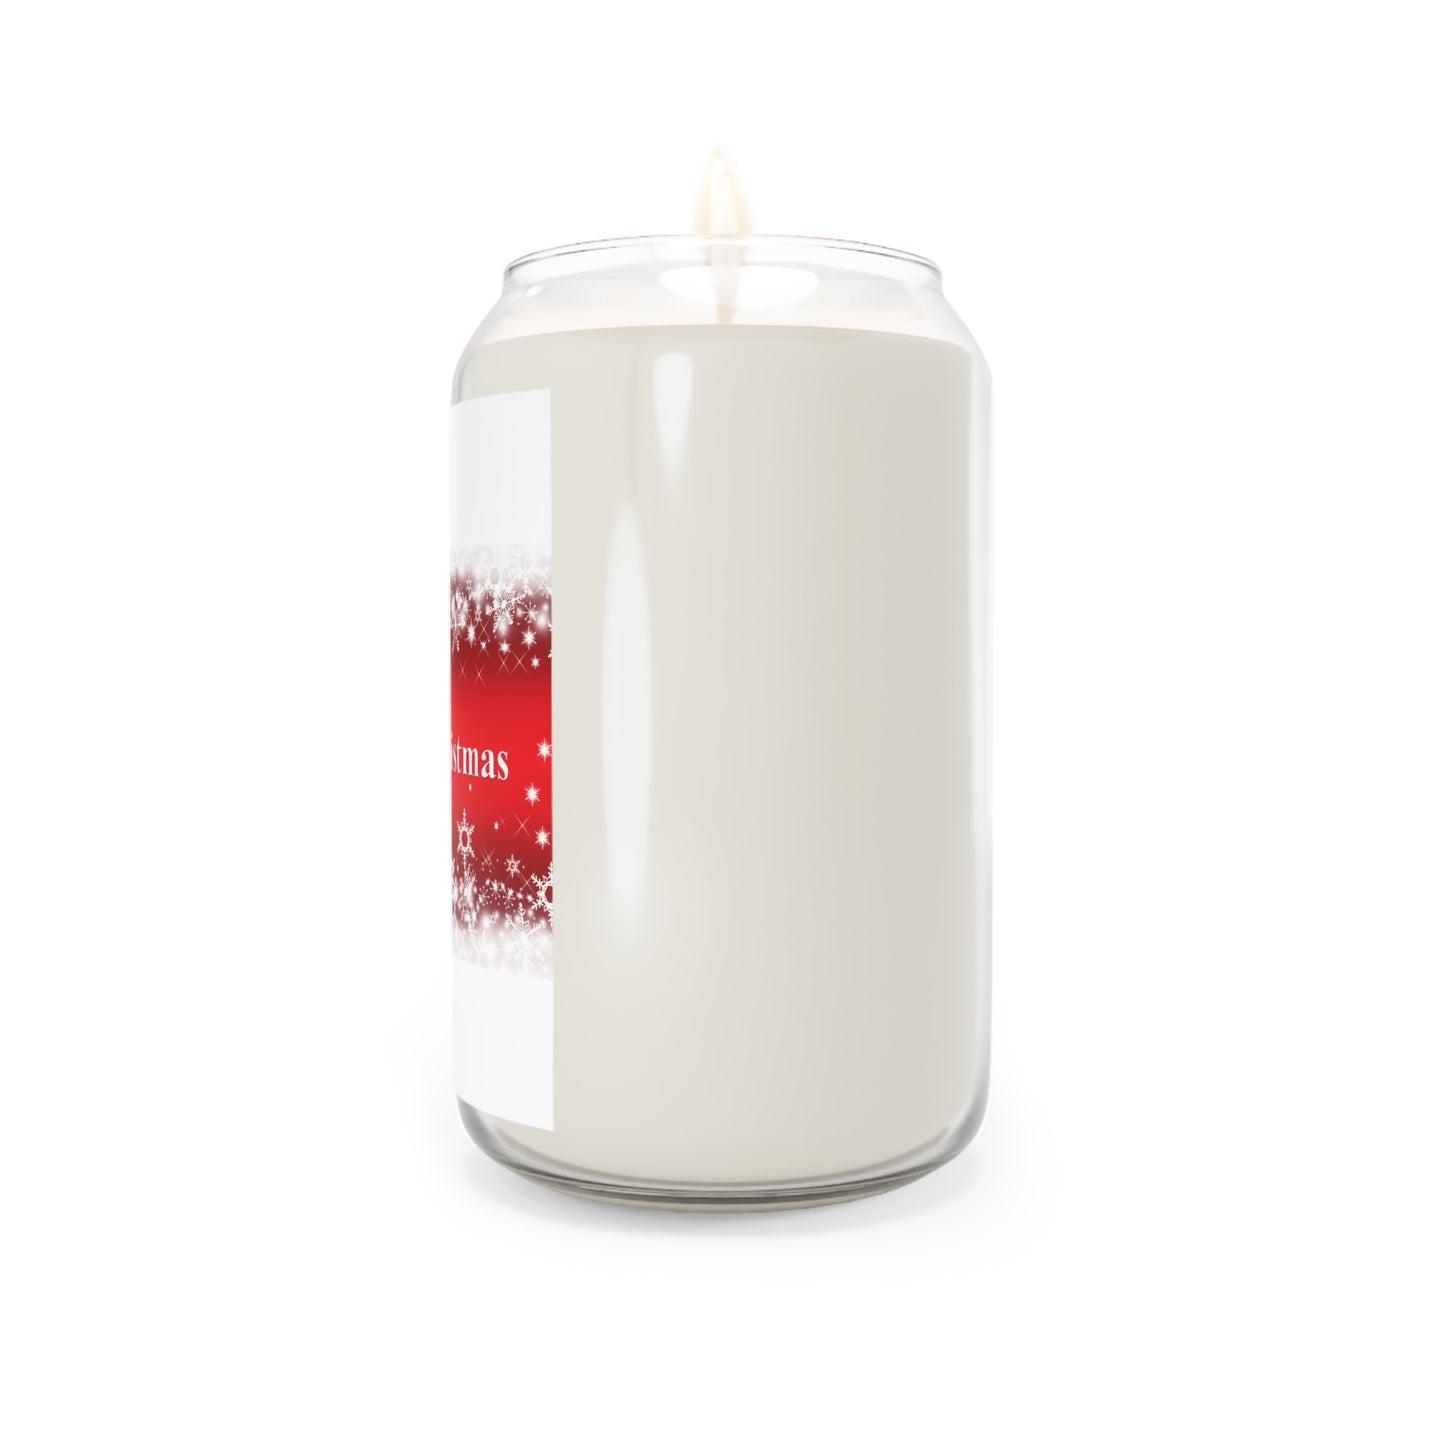 Merry Christmas Scented Candle, 13.75oz, Comes in 3 Scents